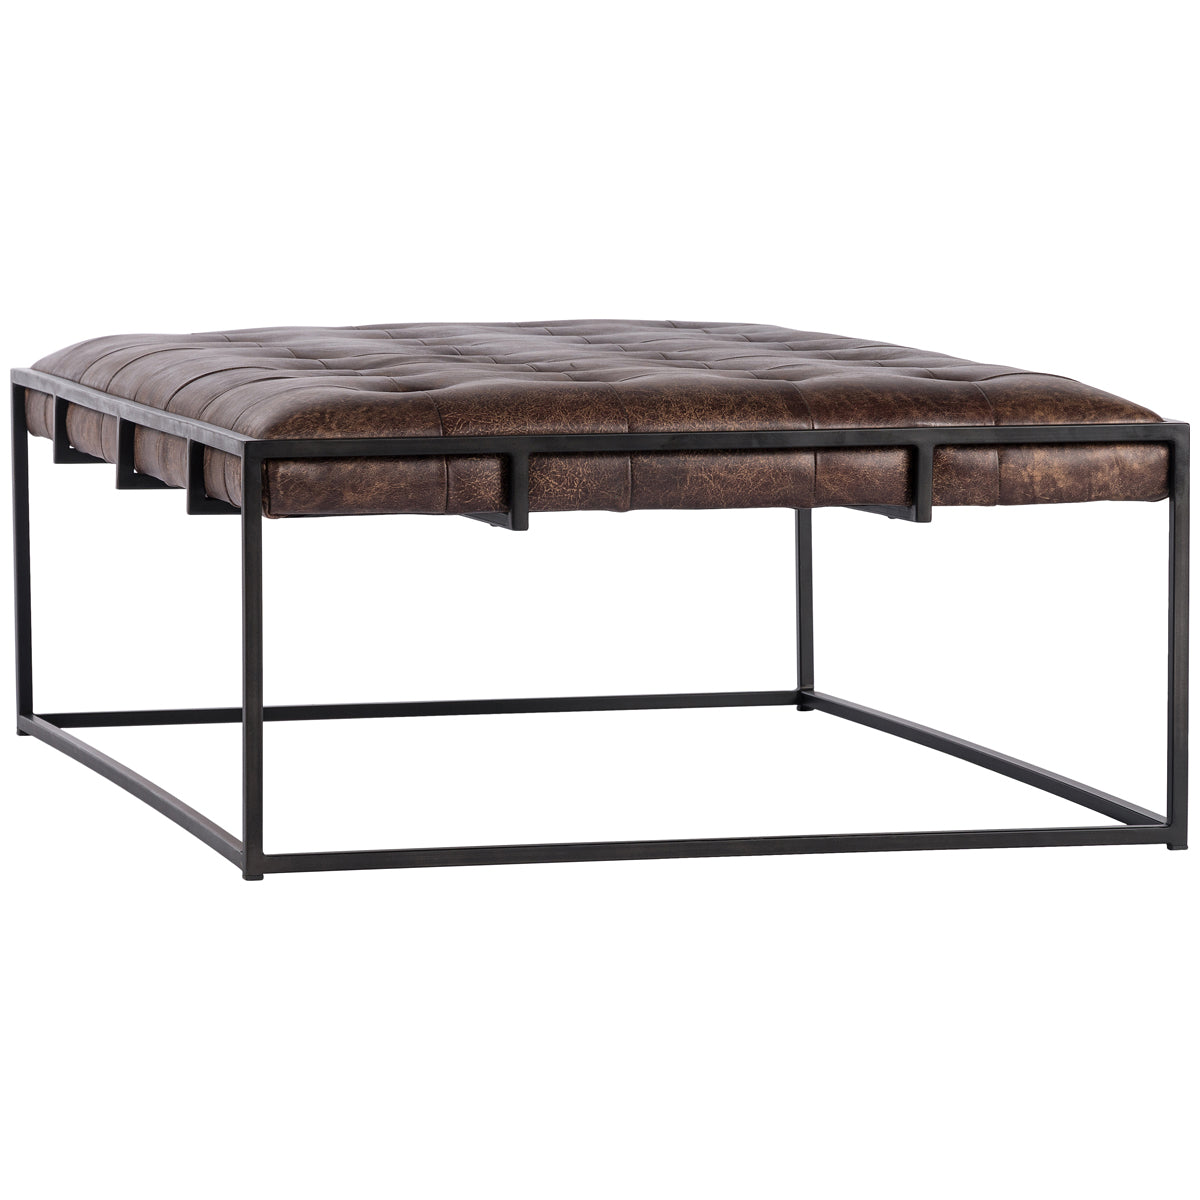 Four Hands Irondale Oxford Coffee Table - Havana